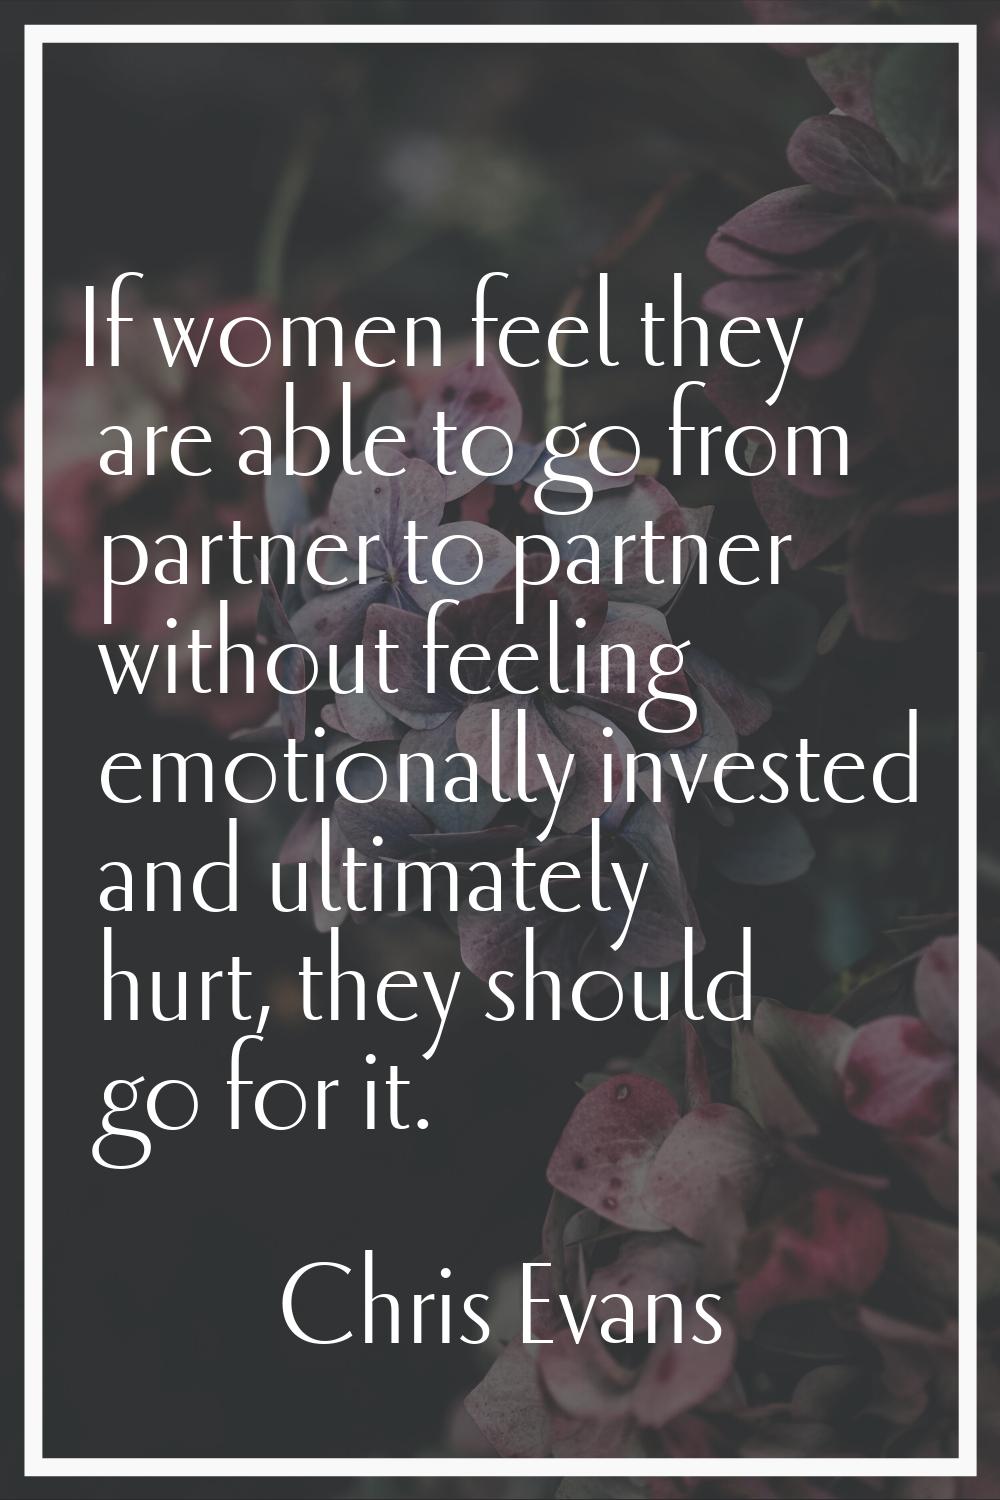 If women feel they are able to go from partner to partner without feeling emotionally invested and 